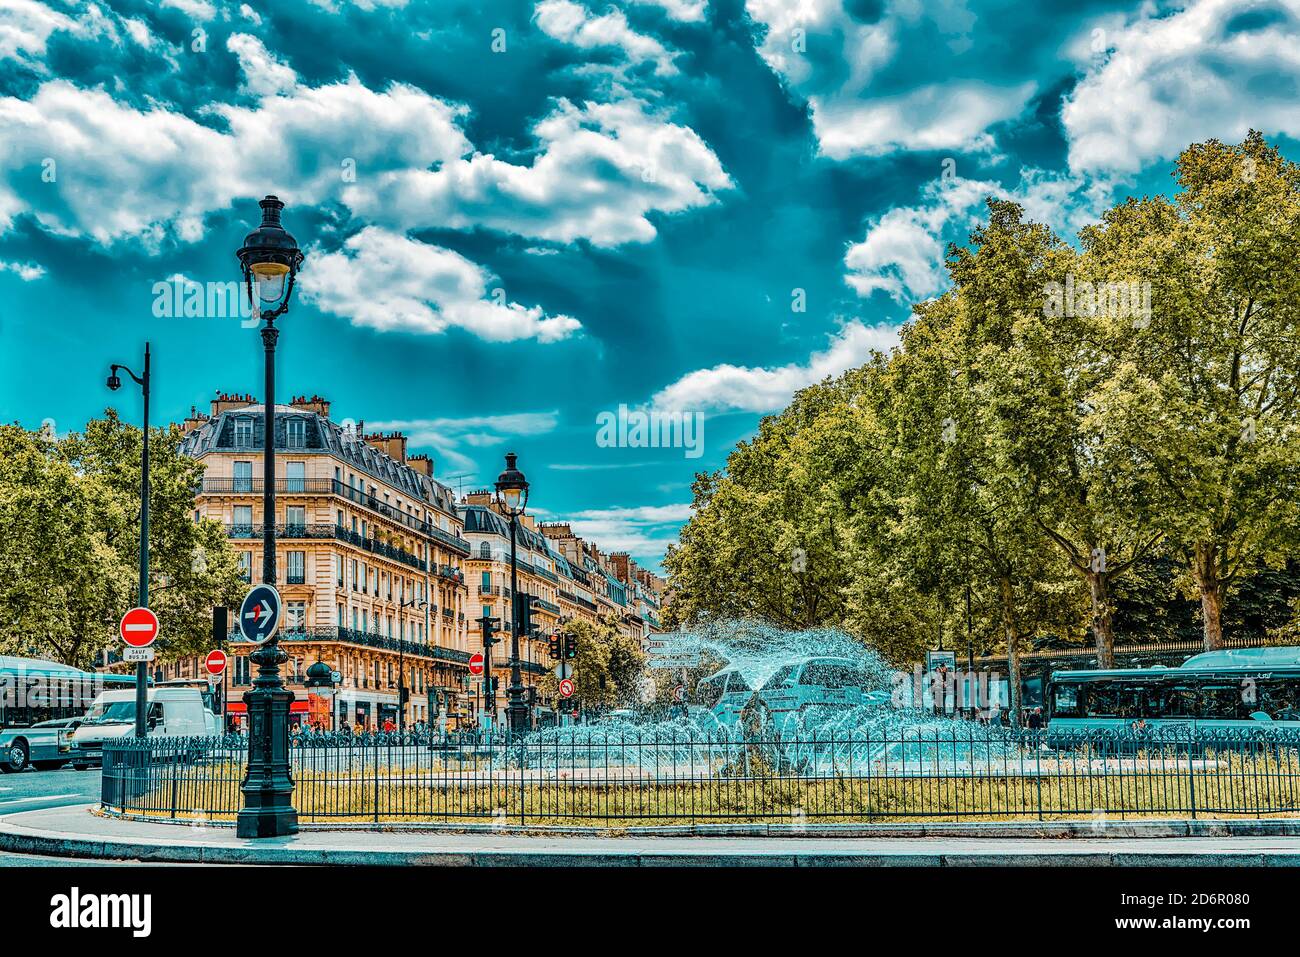 PARIS, FRANCE - JULY 08, 2016 : Fontaine Rostand near Luxembourg Palase and park in Paris, France. Stock Photo